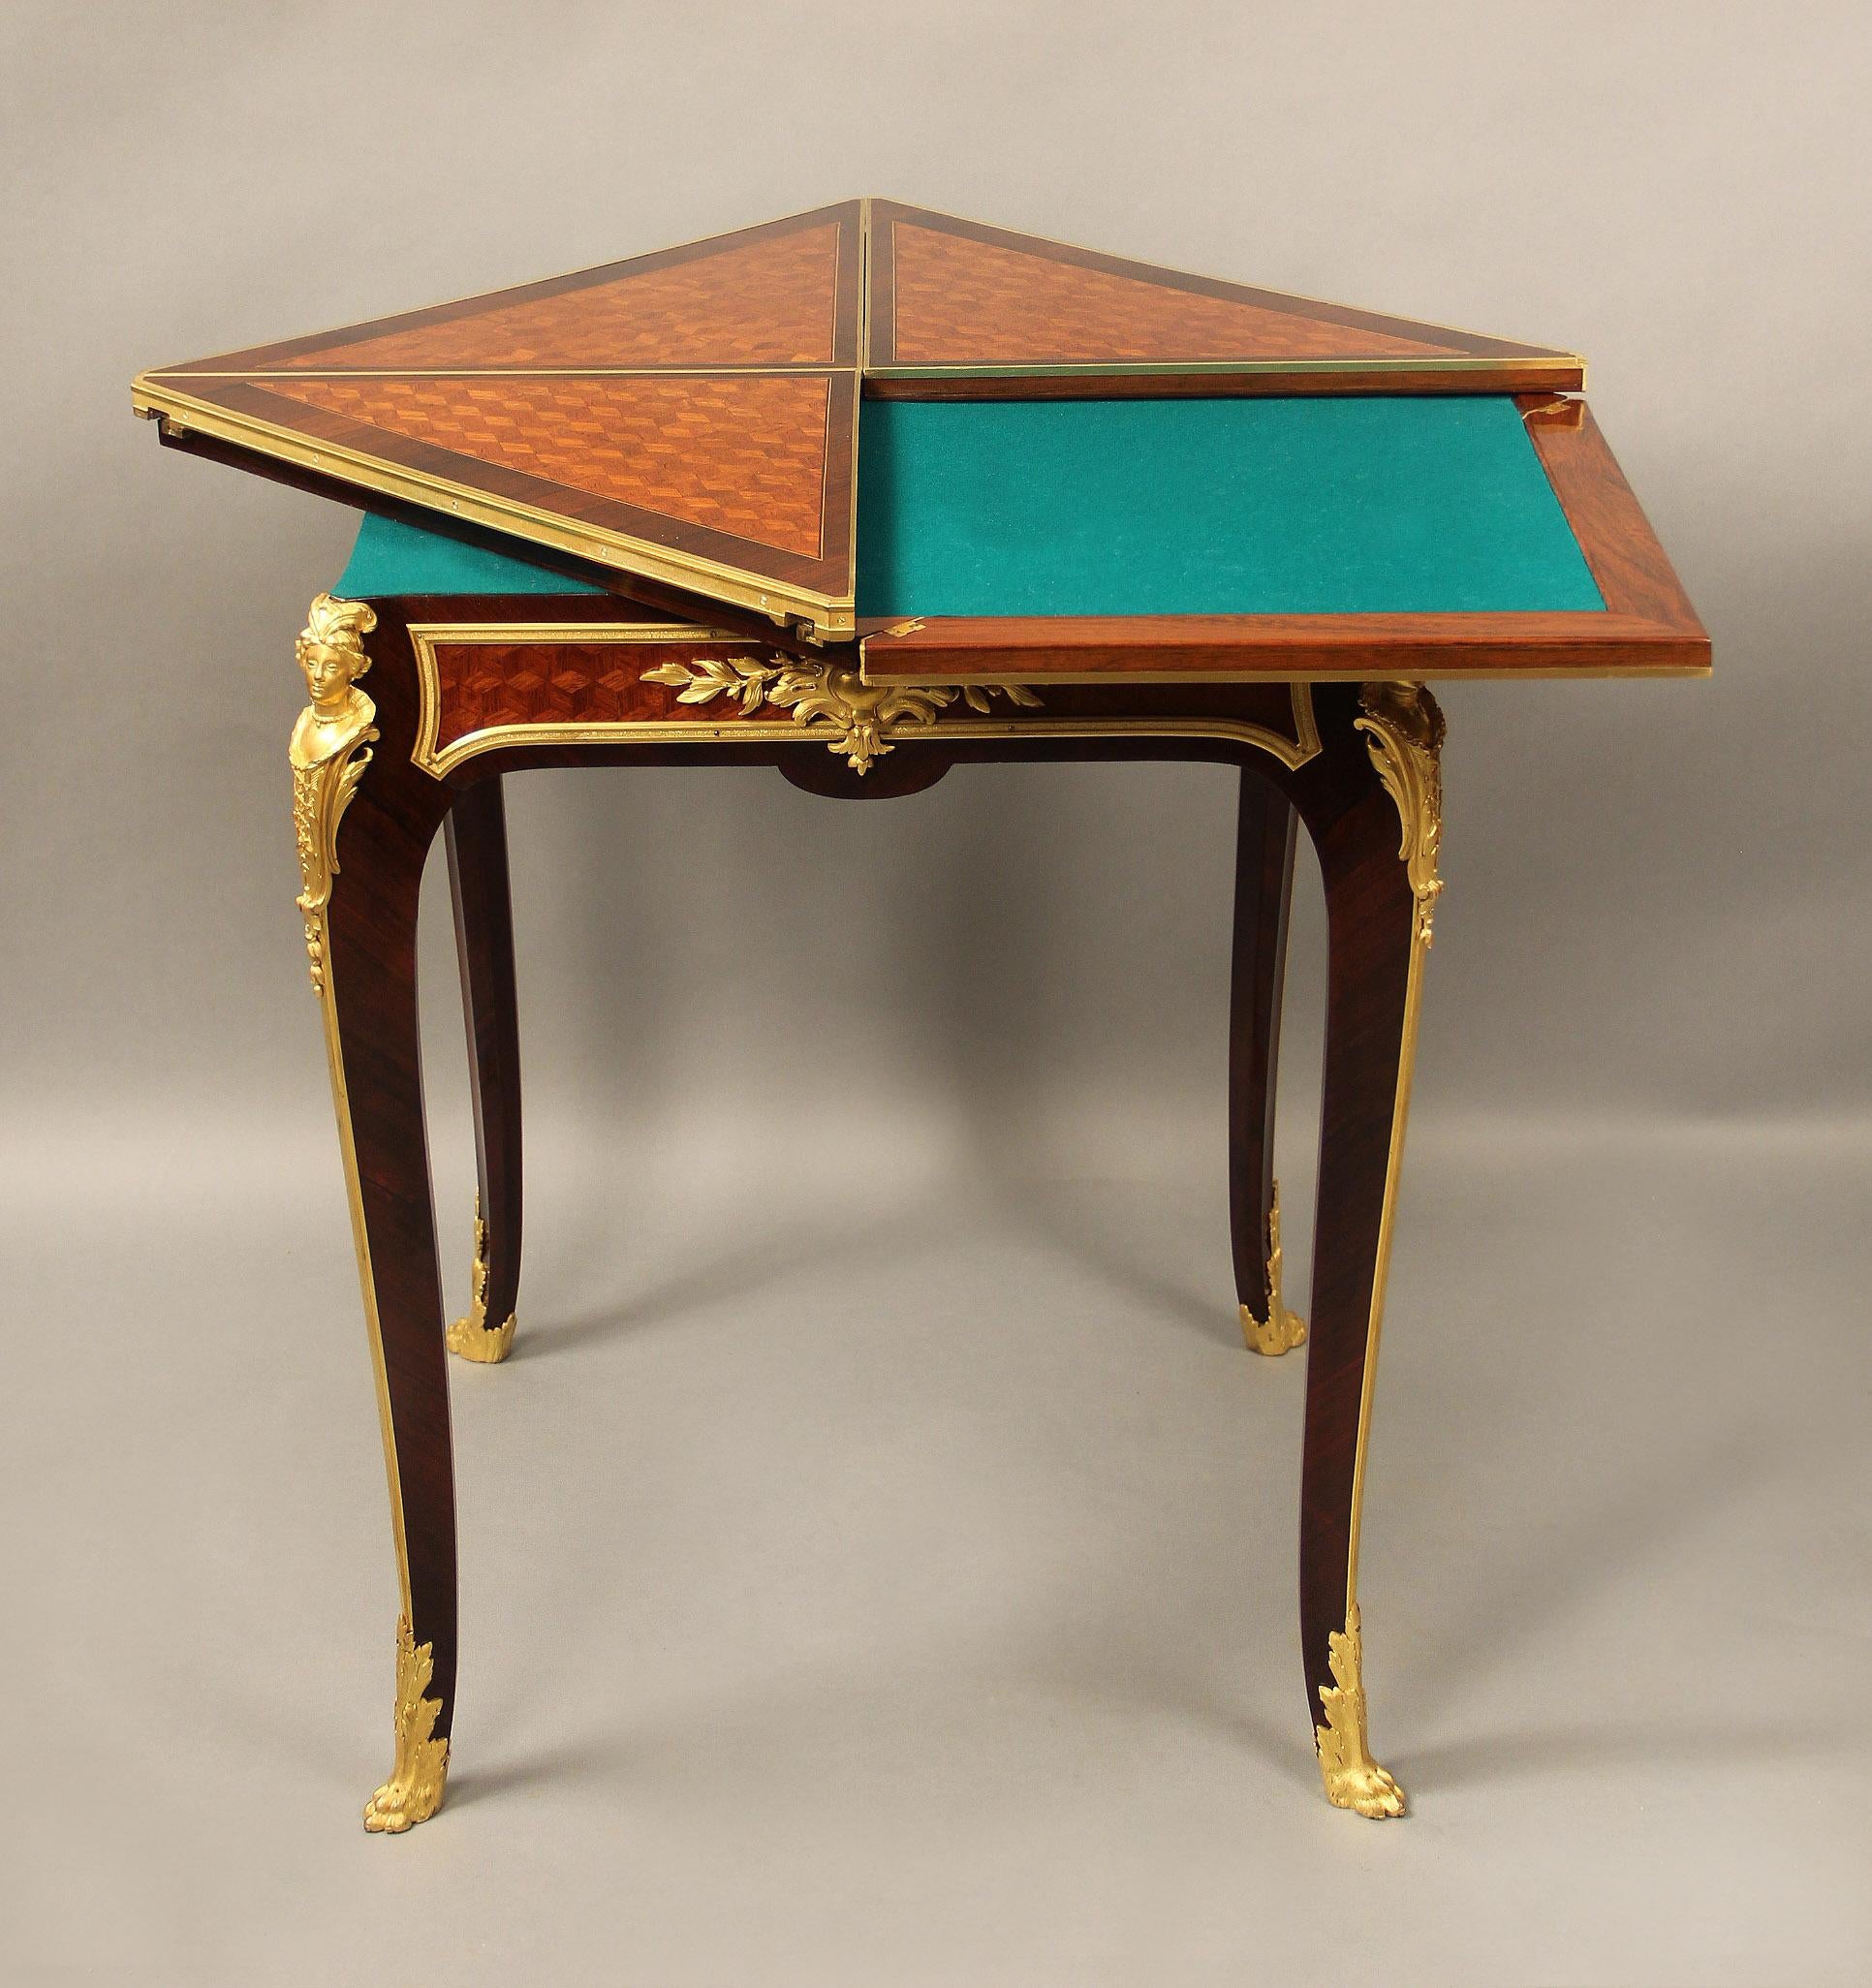 A wonderful late 19th century gilt bronze mounted parquetry envelope game table by François Linke

François Linke – Index no. 523

The revolving top with four triangular leafs, opening to green baize-lined playing surface above a frieze fitted